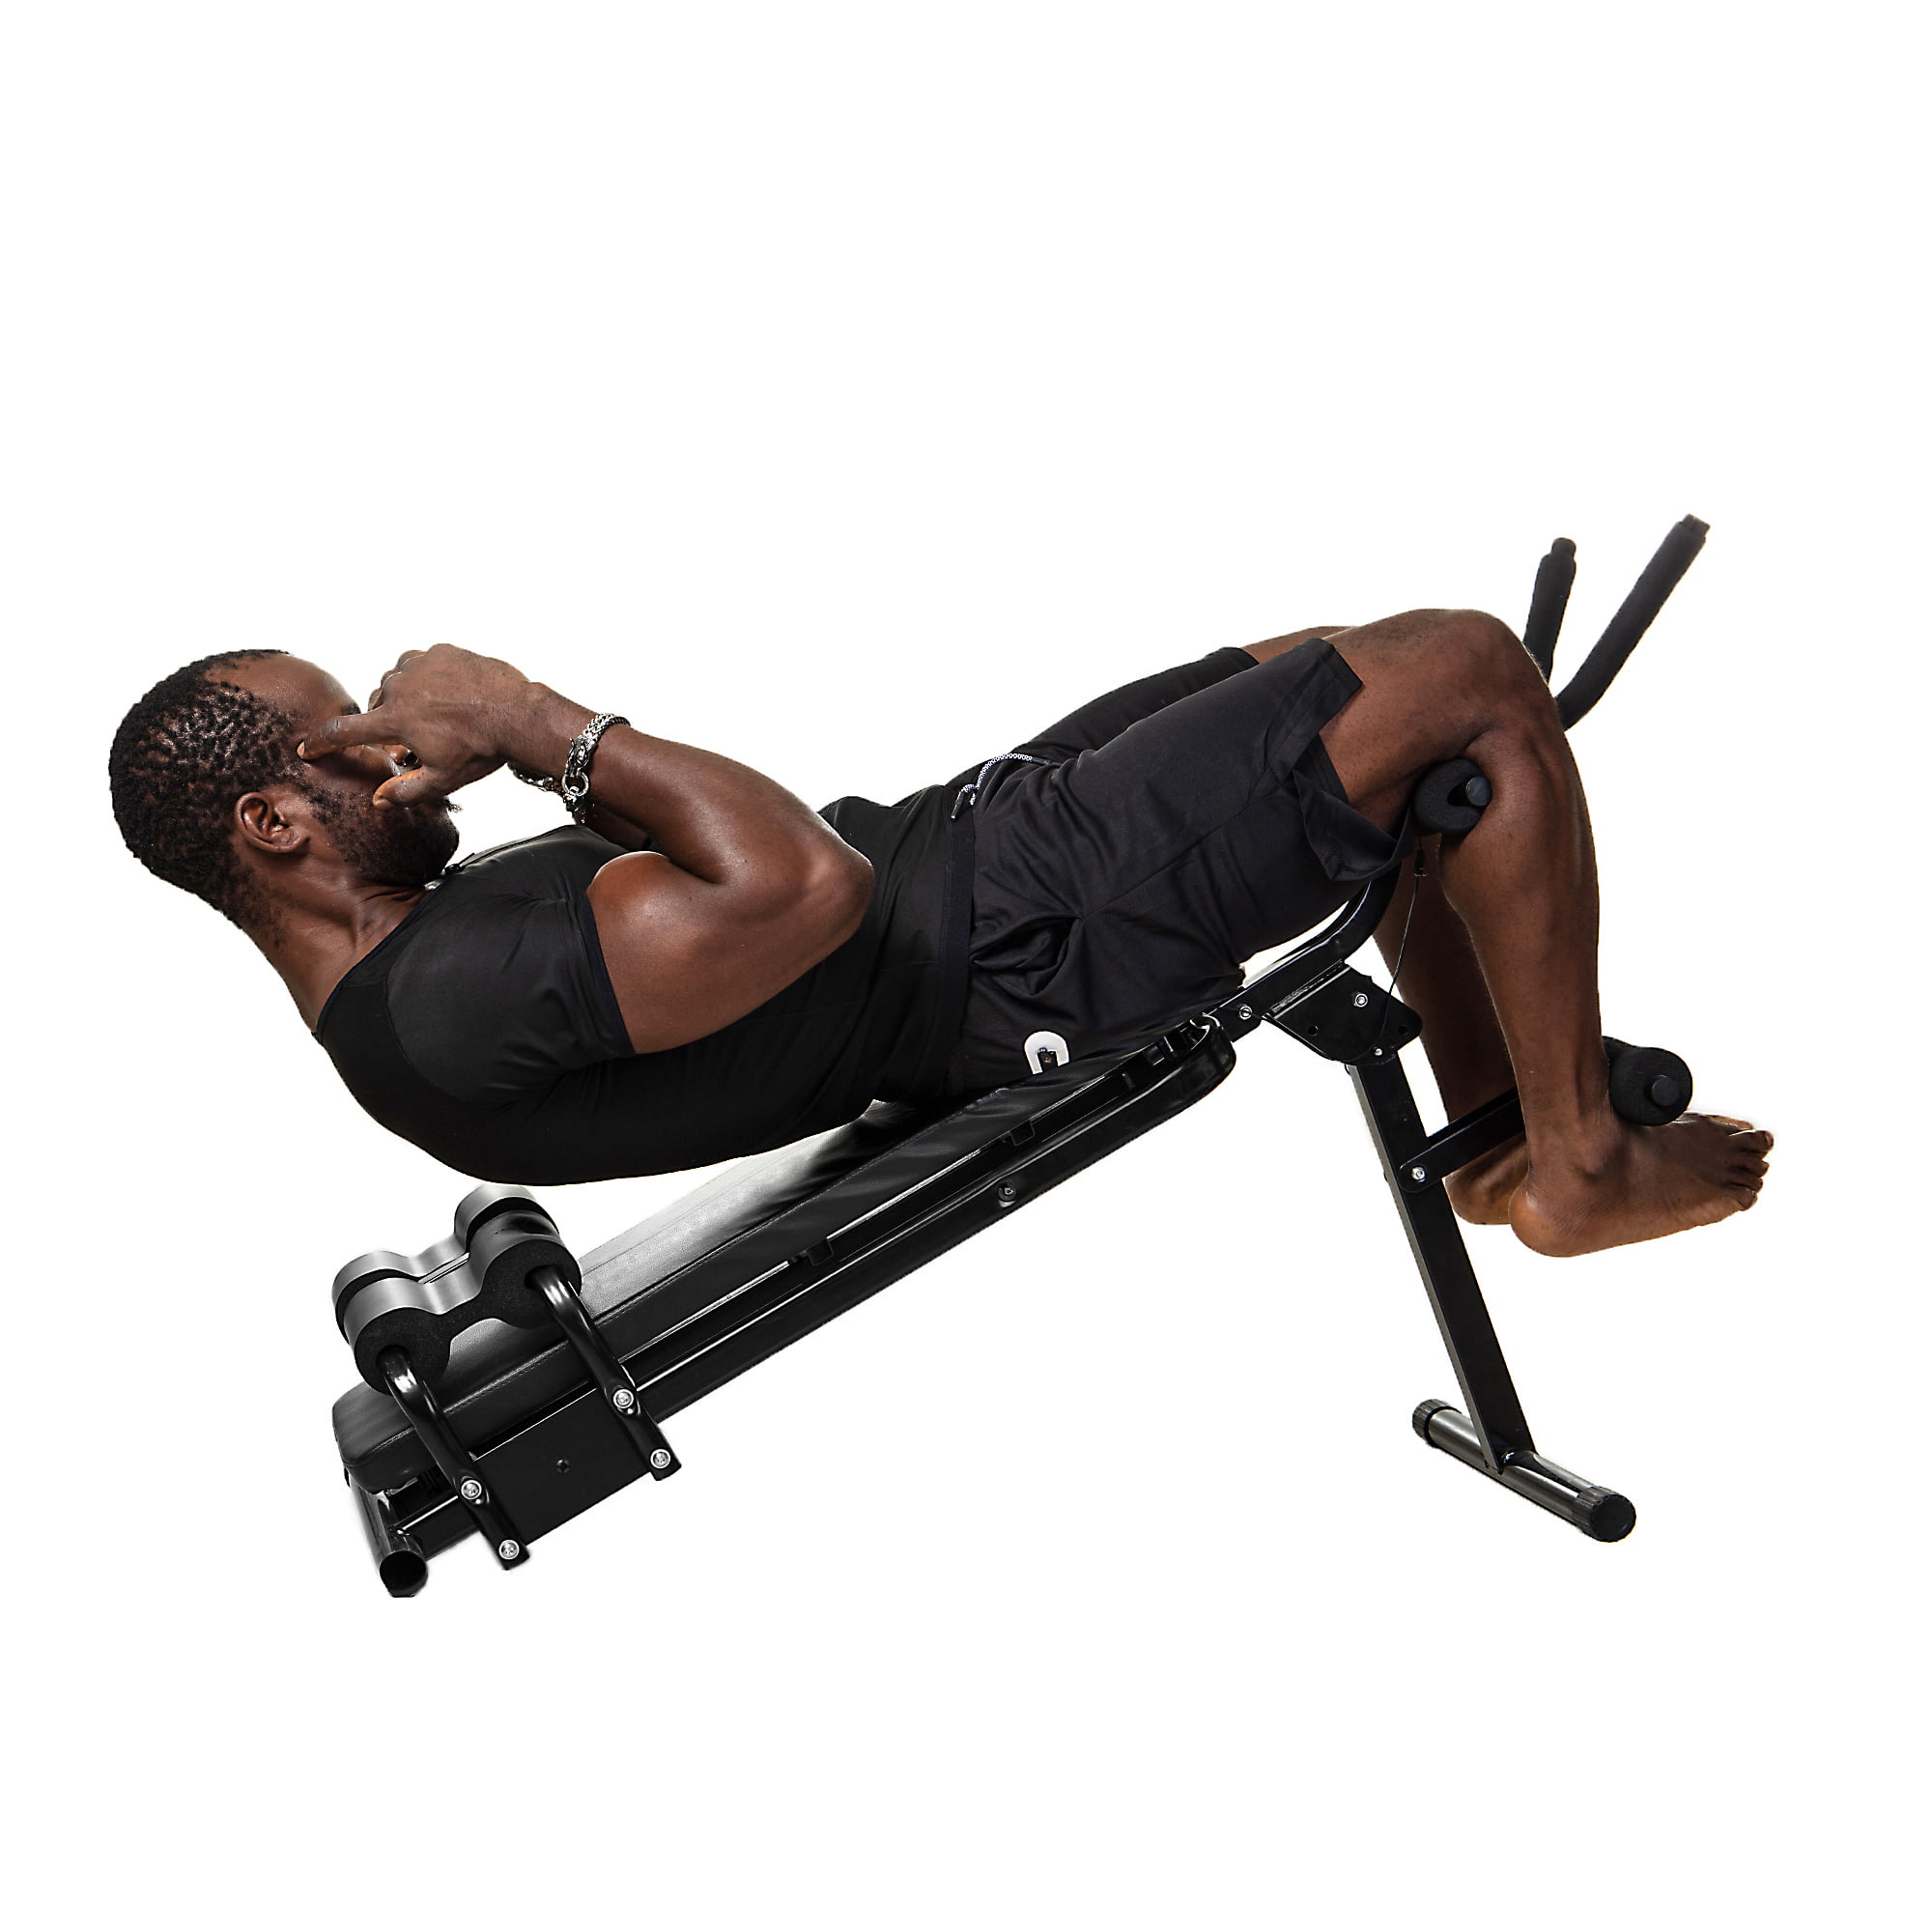  Small Portable Workout Bench for Gym